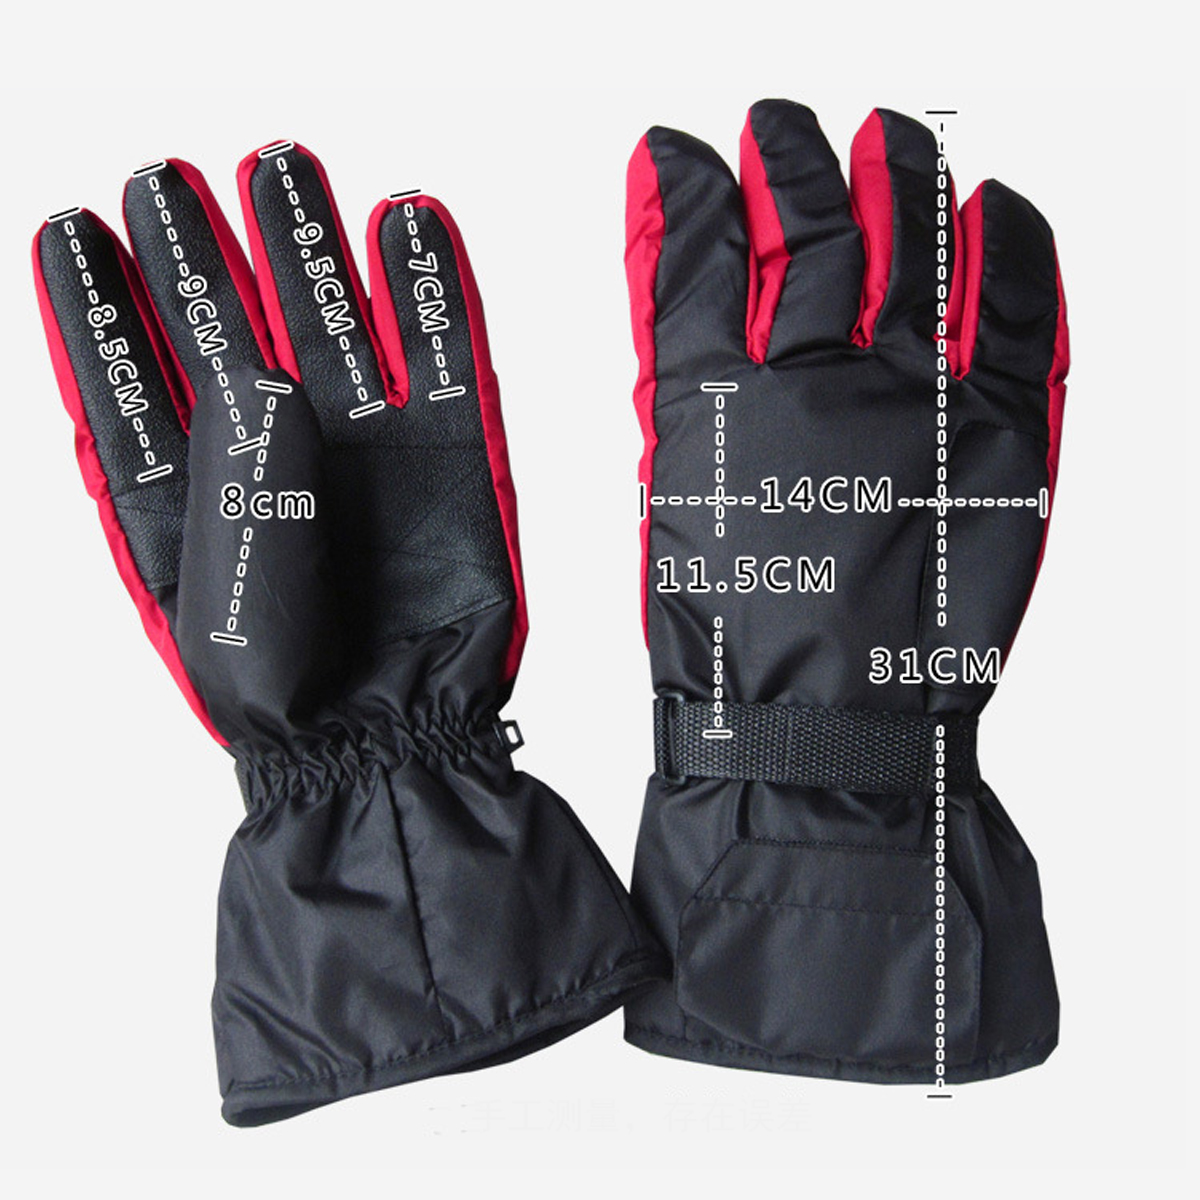 45V-Smart-Electric-Heated-Gloves-Winter-Ski-Cycling-Keep-Warm-Battery-Powered-Heating-Gloves-5-Finge-1771505-5